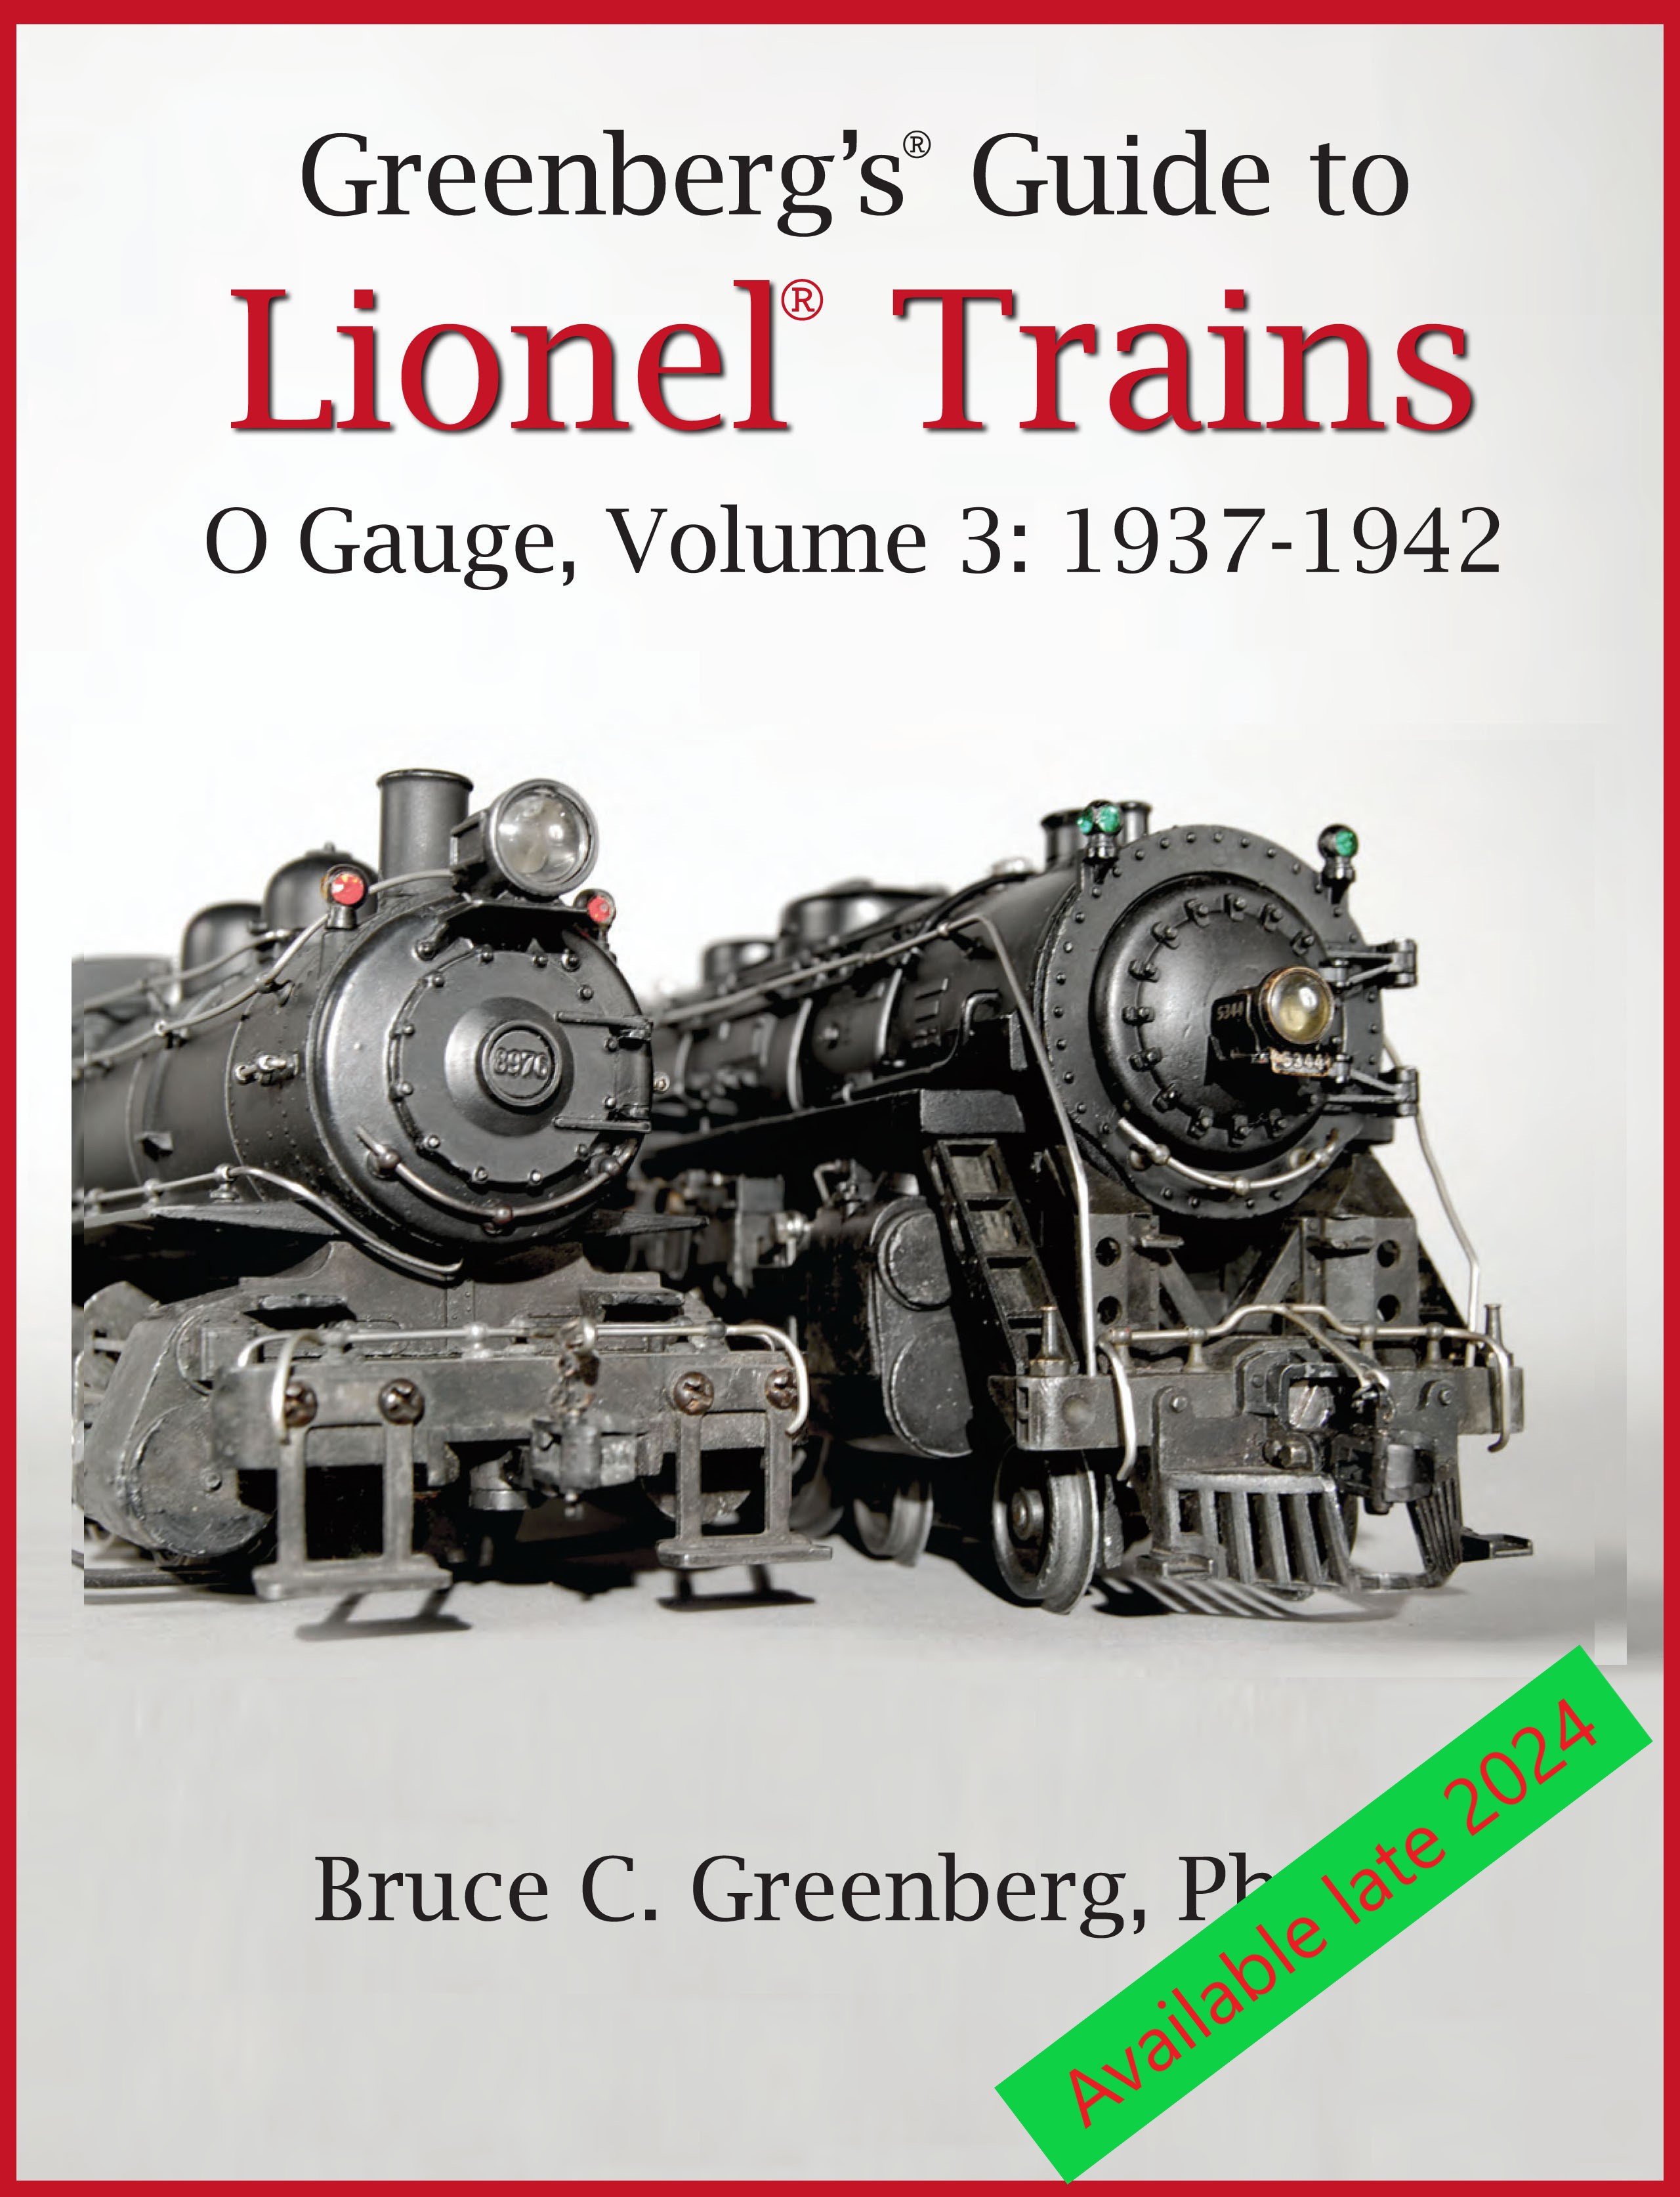 for sale online Greenberg's Guide to Lionel Trains Greenberg 2000, Trade Paperback, Anniversary 1901-1942 : O Gauge by Linda and Bruce C 